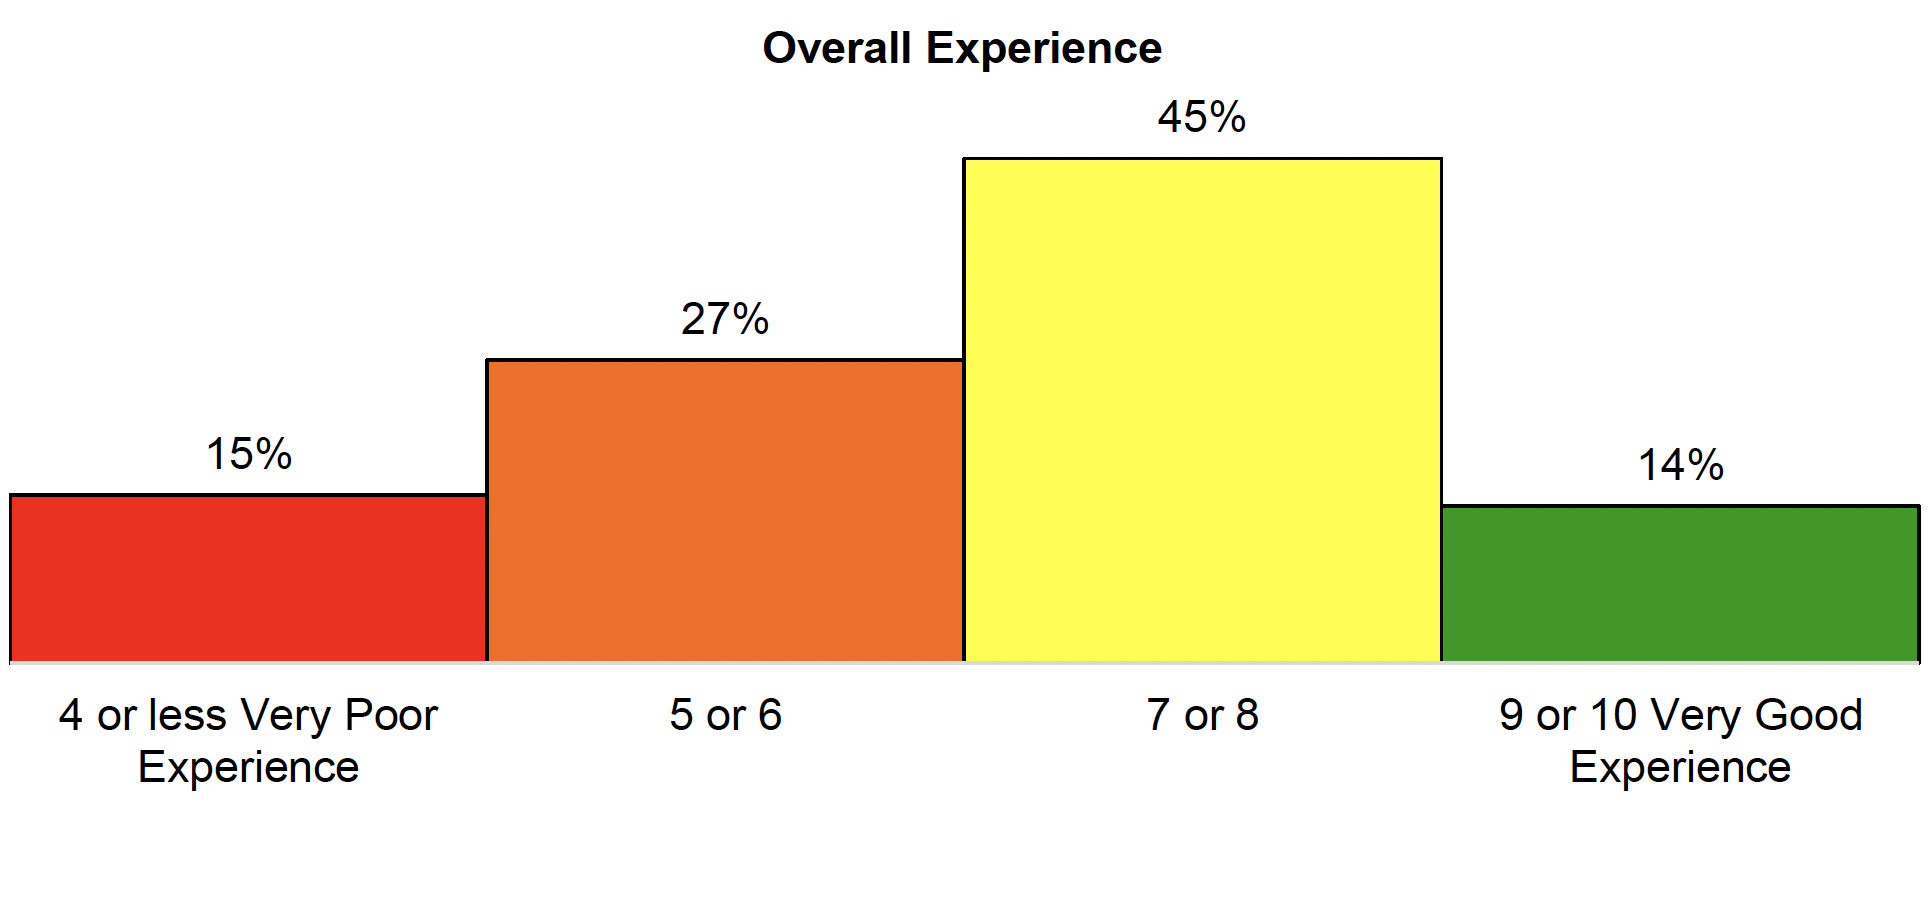 Chart showing Overall Experience scores:
15% 4 or less
27% 5 or 6
45% 7 or 8
14% 9 or 10